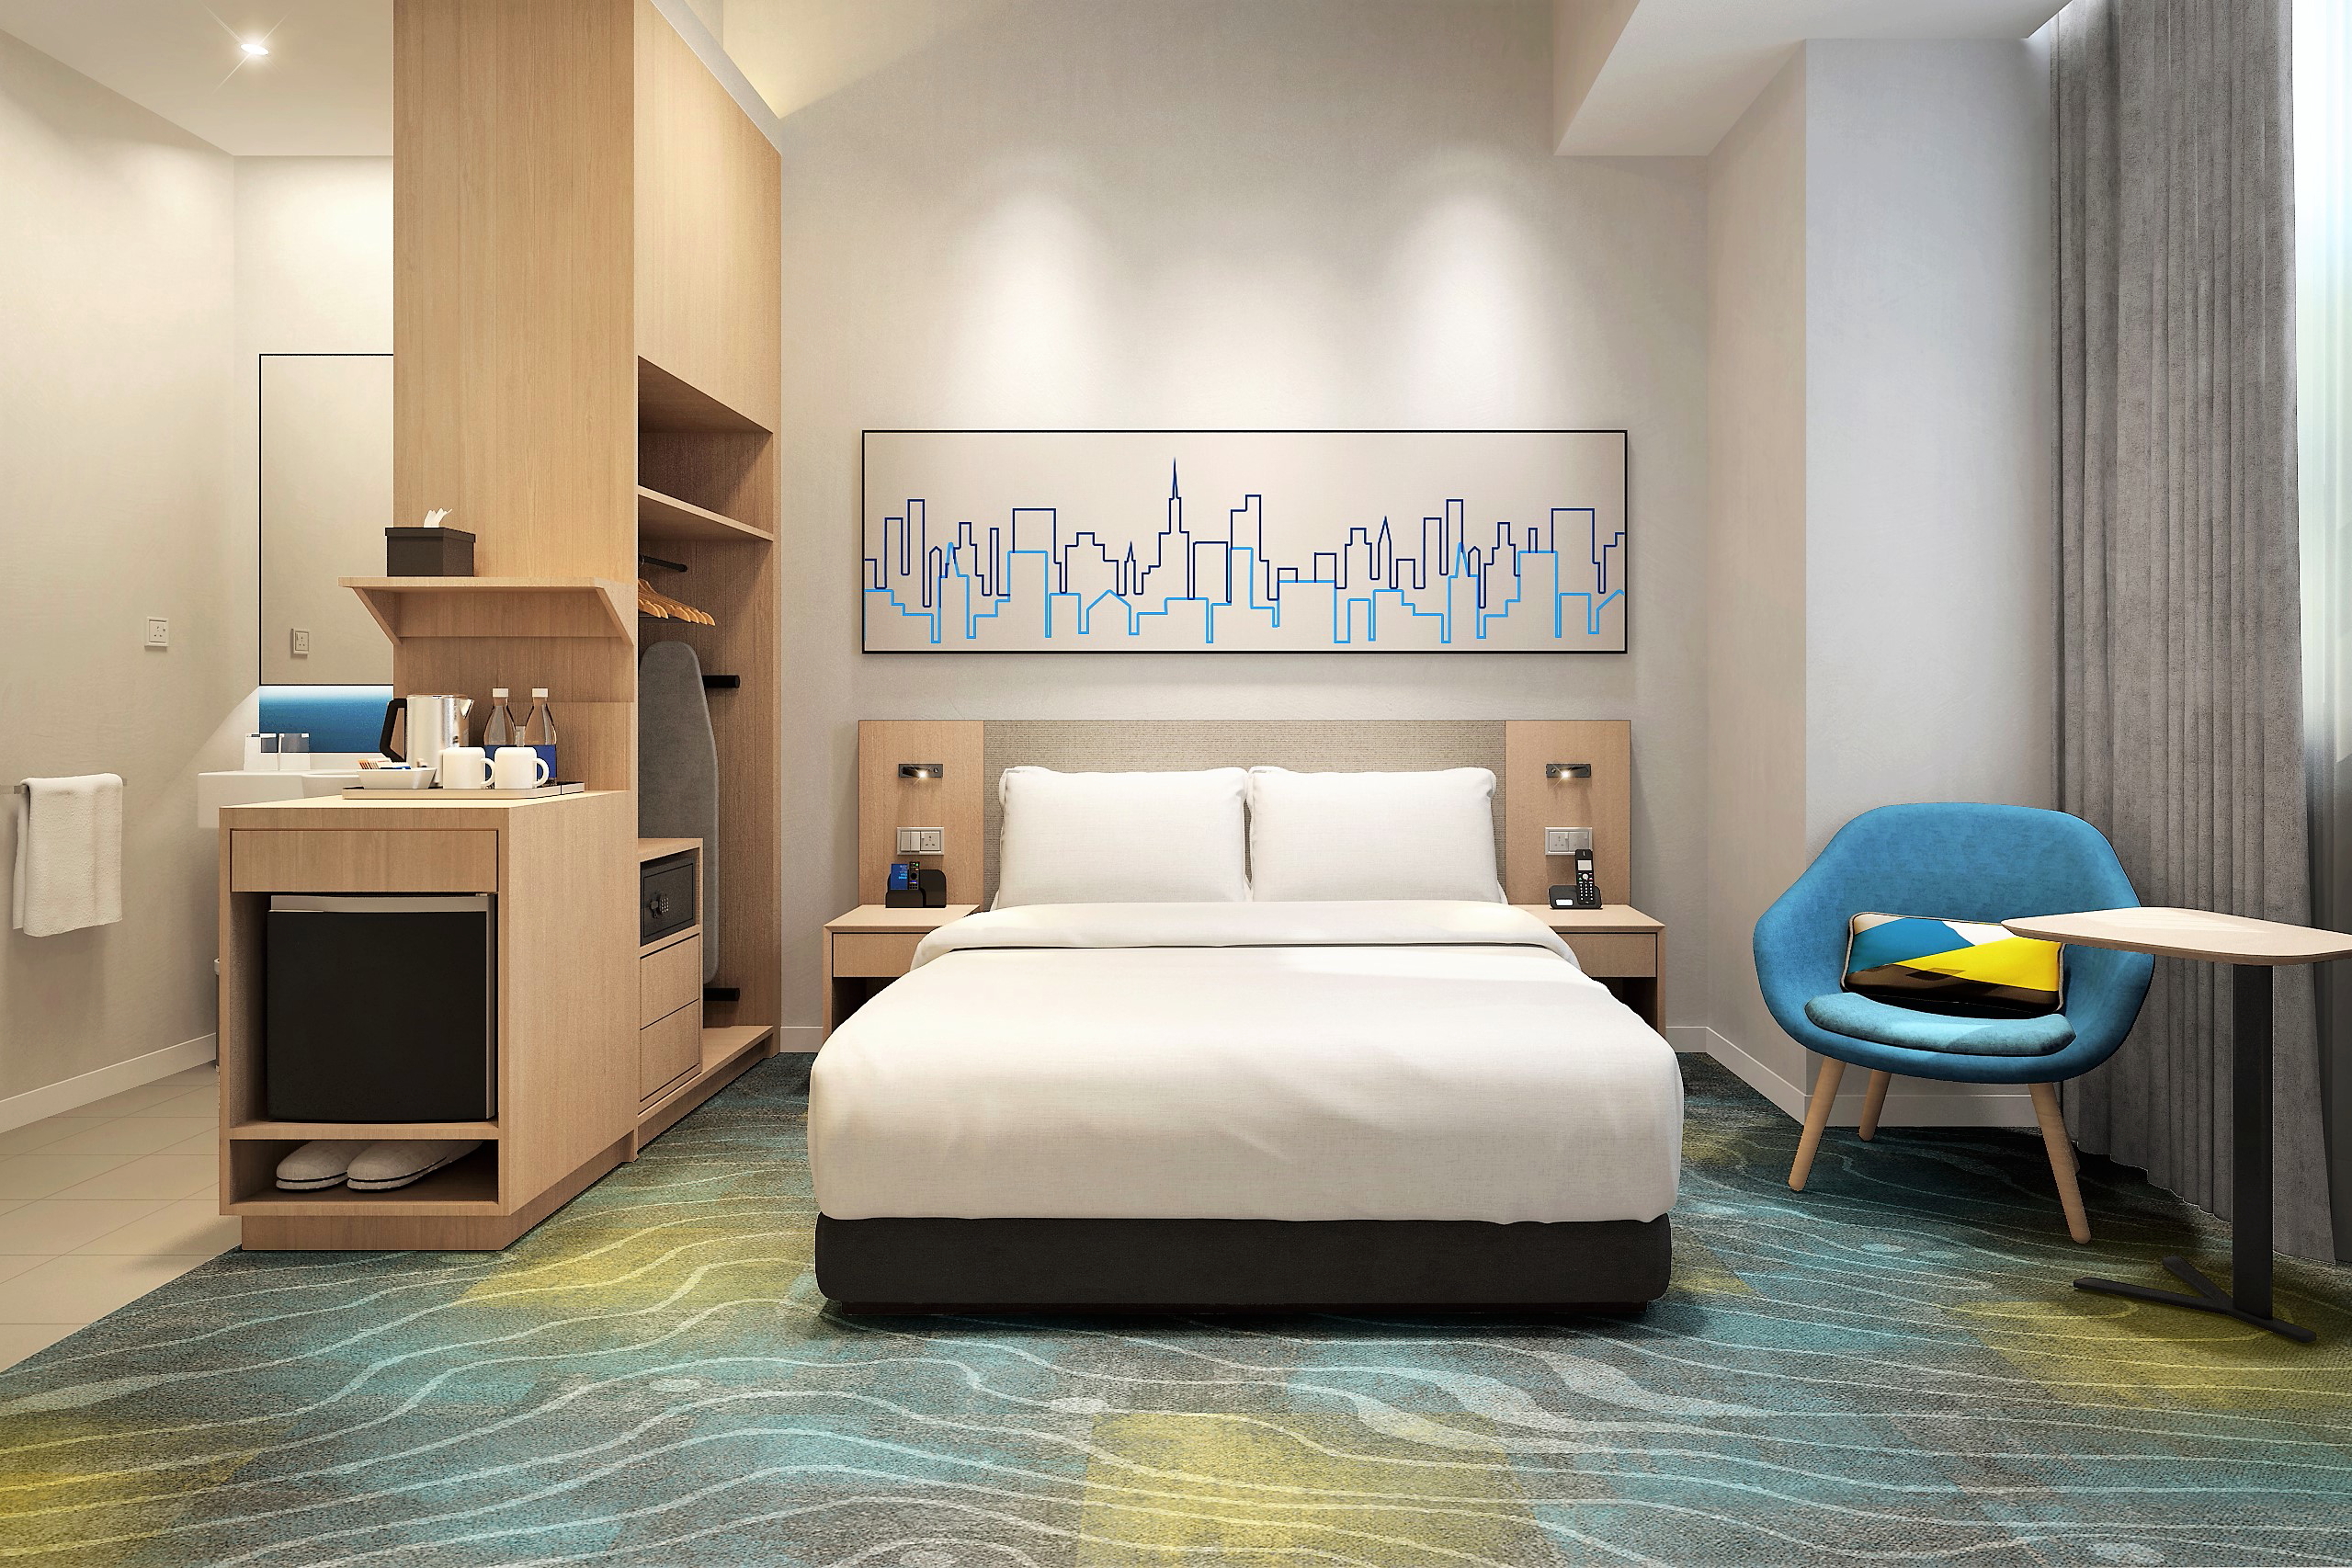 Room at what will soon be the Holiday Inn Express Johor Bahru in Malaysia. Click to enlarge.